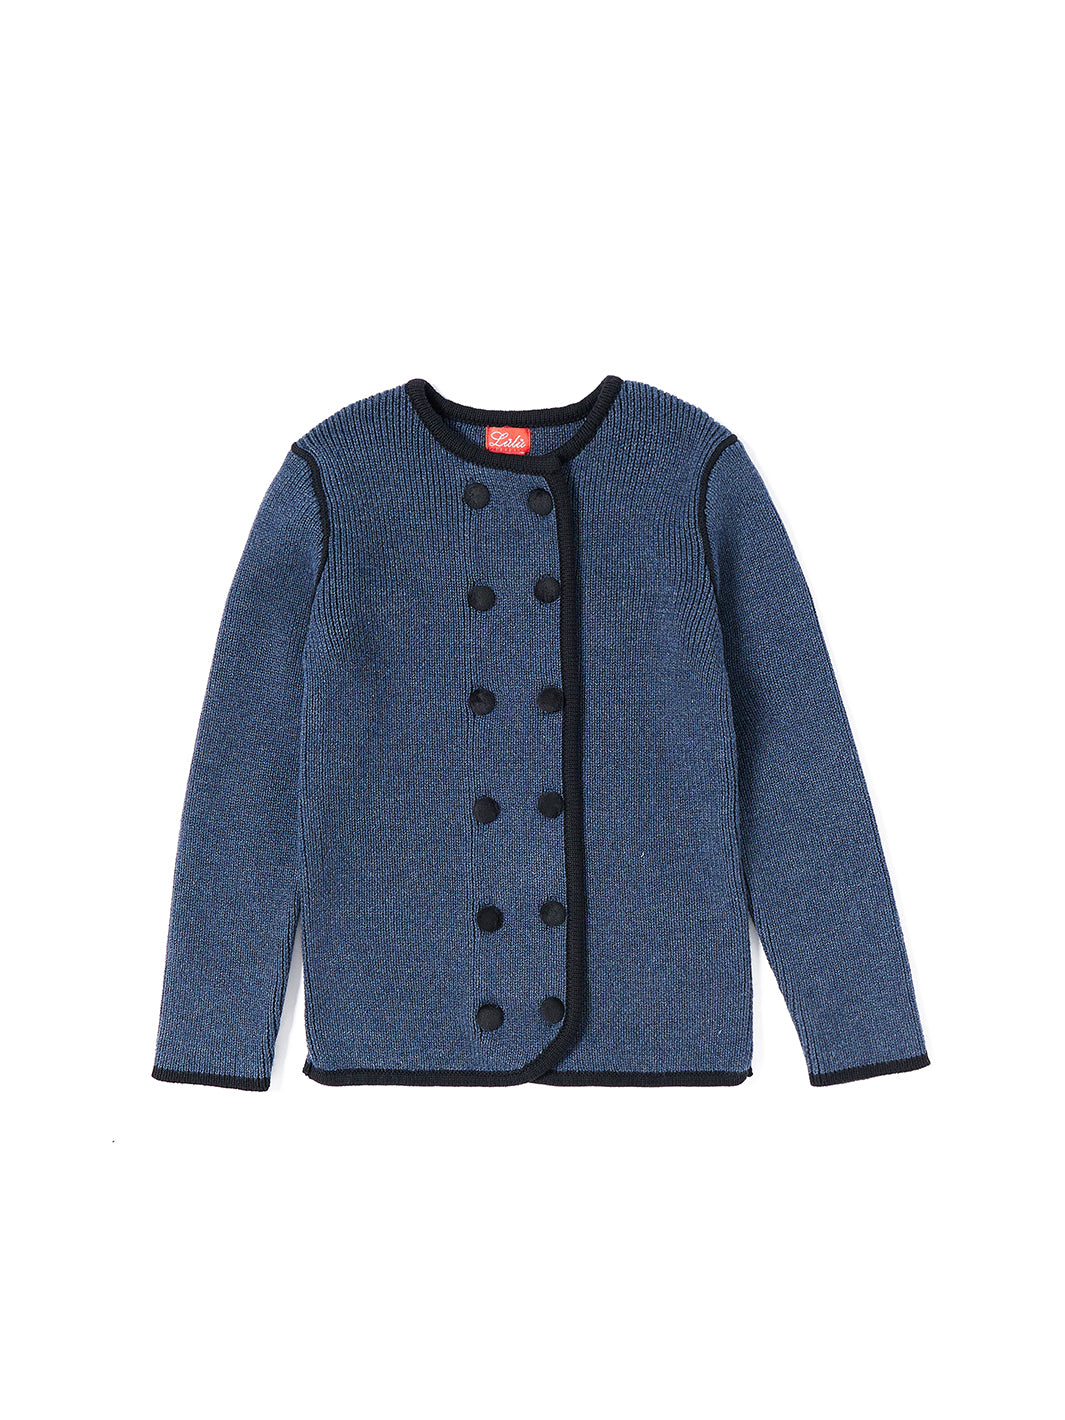 Jacket Overlap Piping Collar Sweater